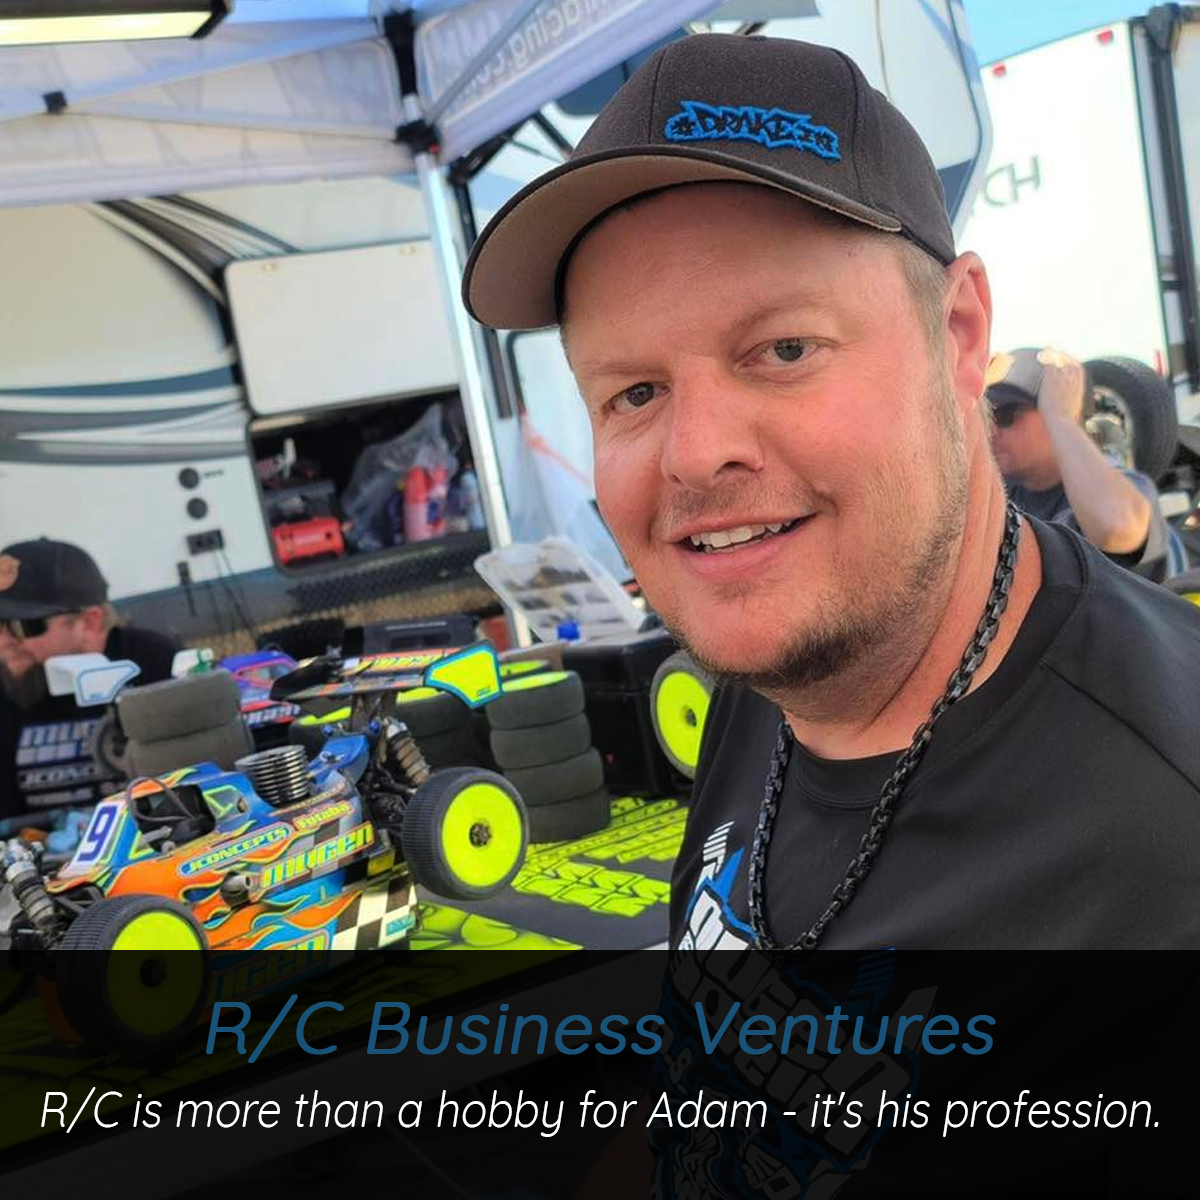 Racing RC's is more than a hobby for Adam - it's his profession.